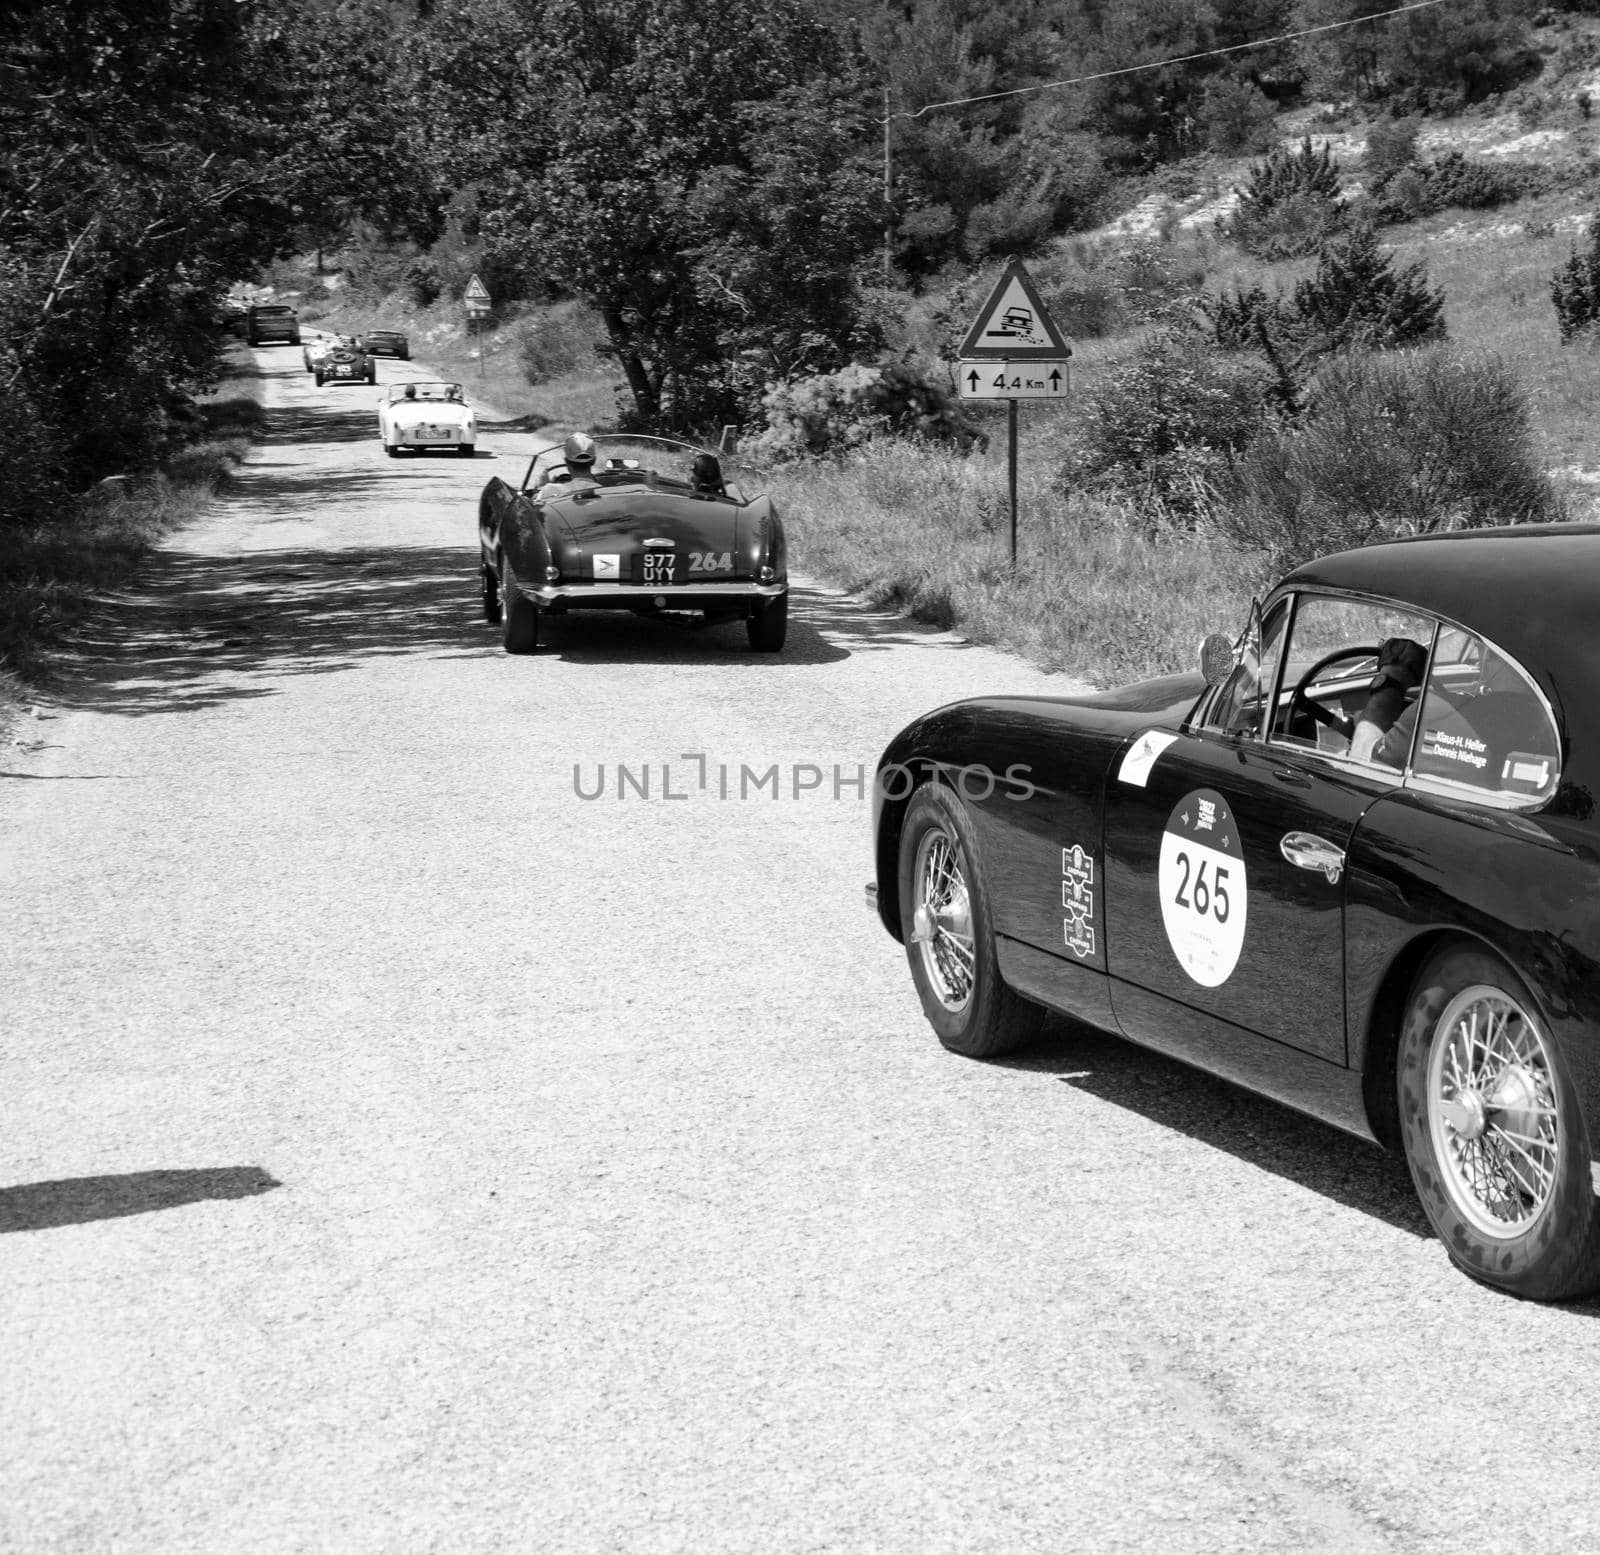 ASTON MARTIN DB 2/4 BERTONE SPIDER 1953 on an old racing car in rally Mille Miglia 2022 the famous italian historical race (1927-1957 by massimocampanari